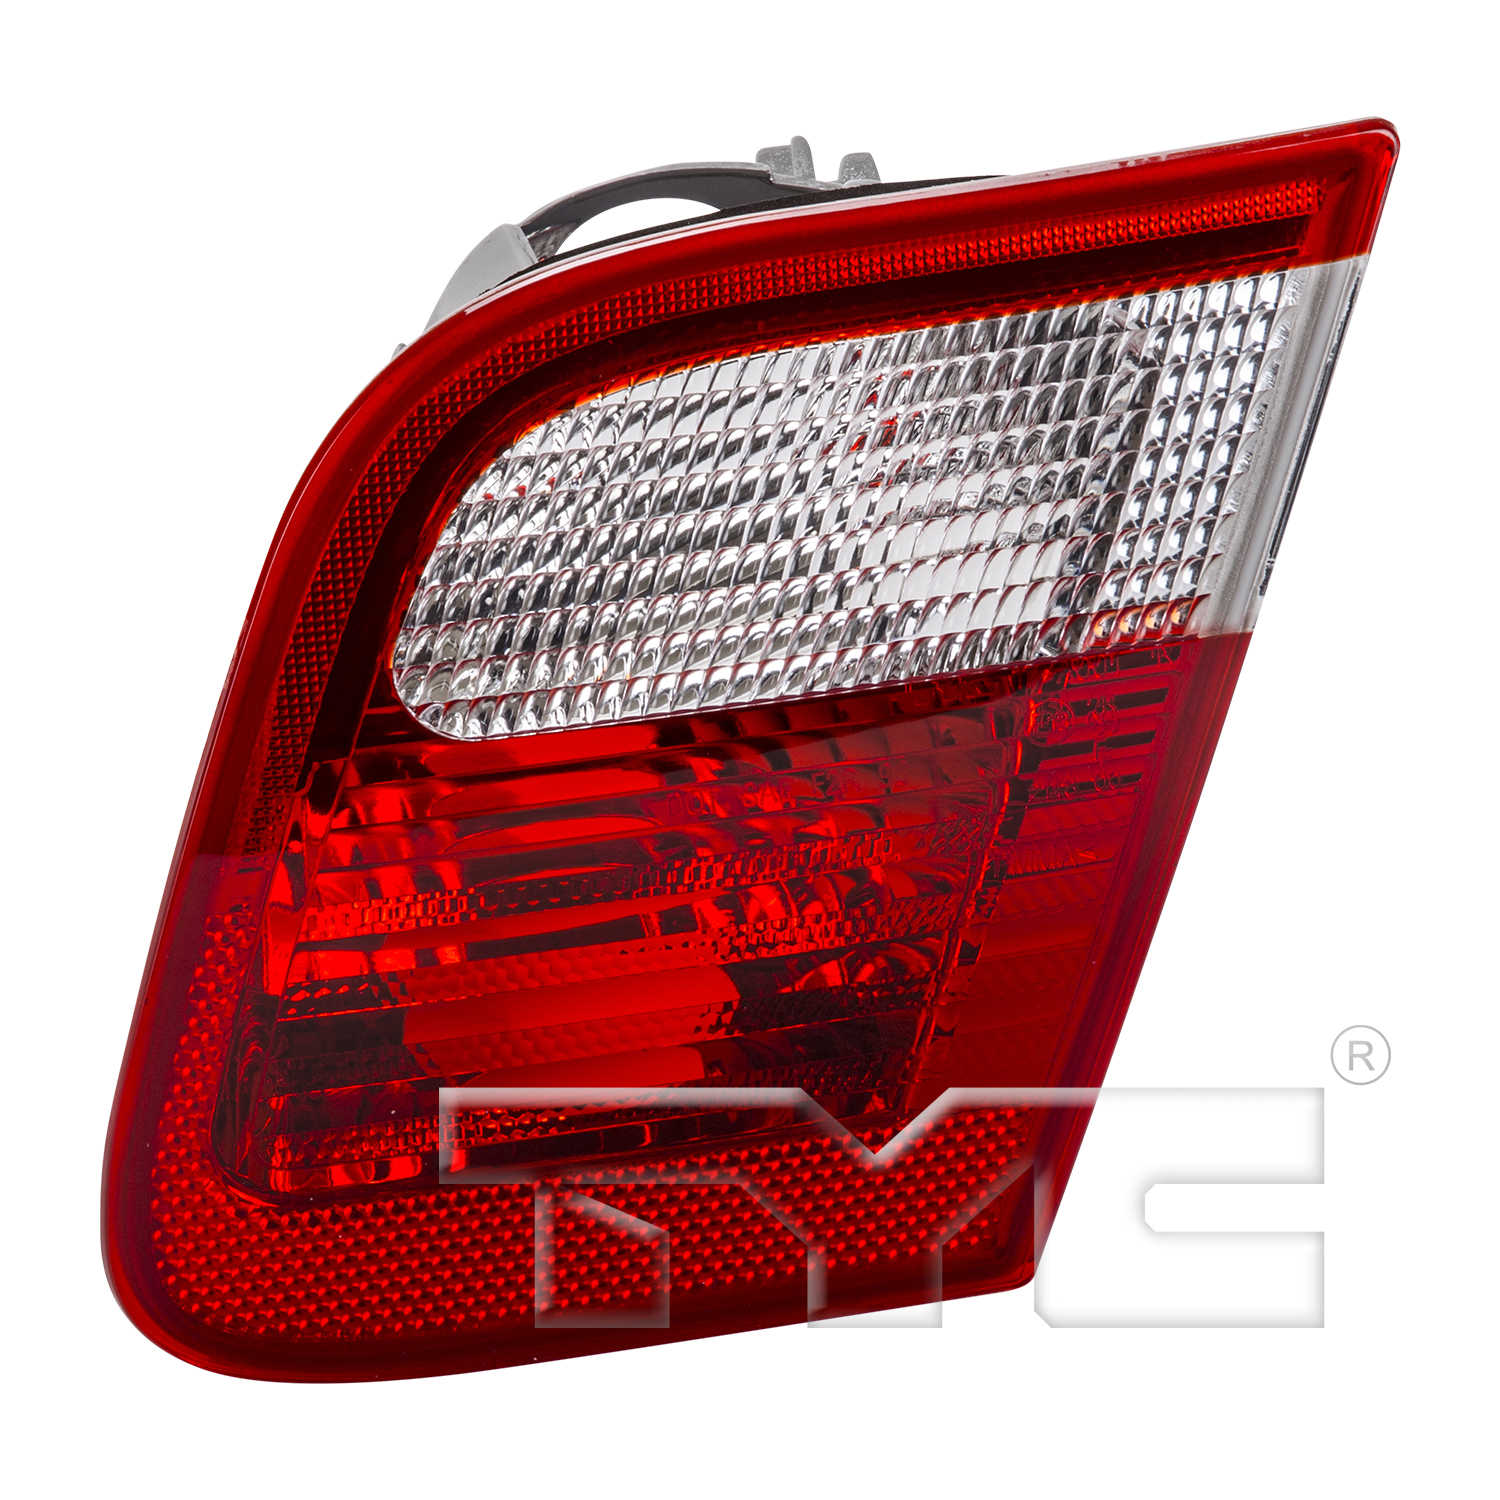 Aftermarket TAILLIGHTS for BMW - 328I, 328i,99-00,RT Back up lamp assy